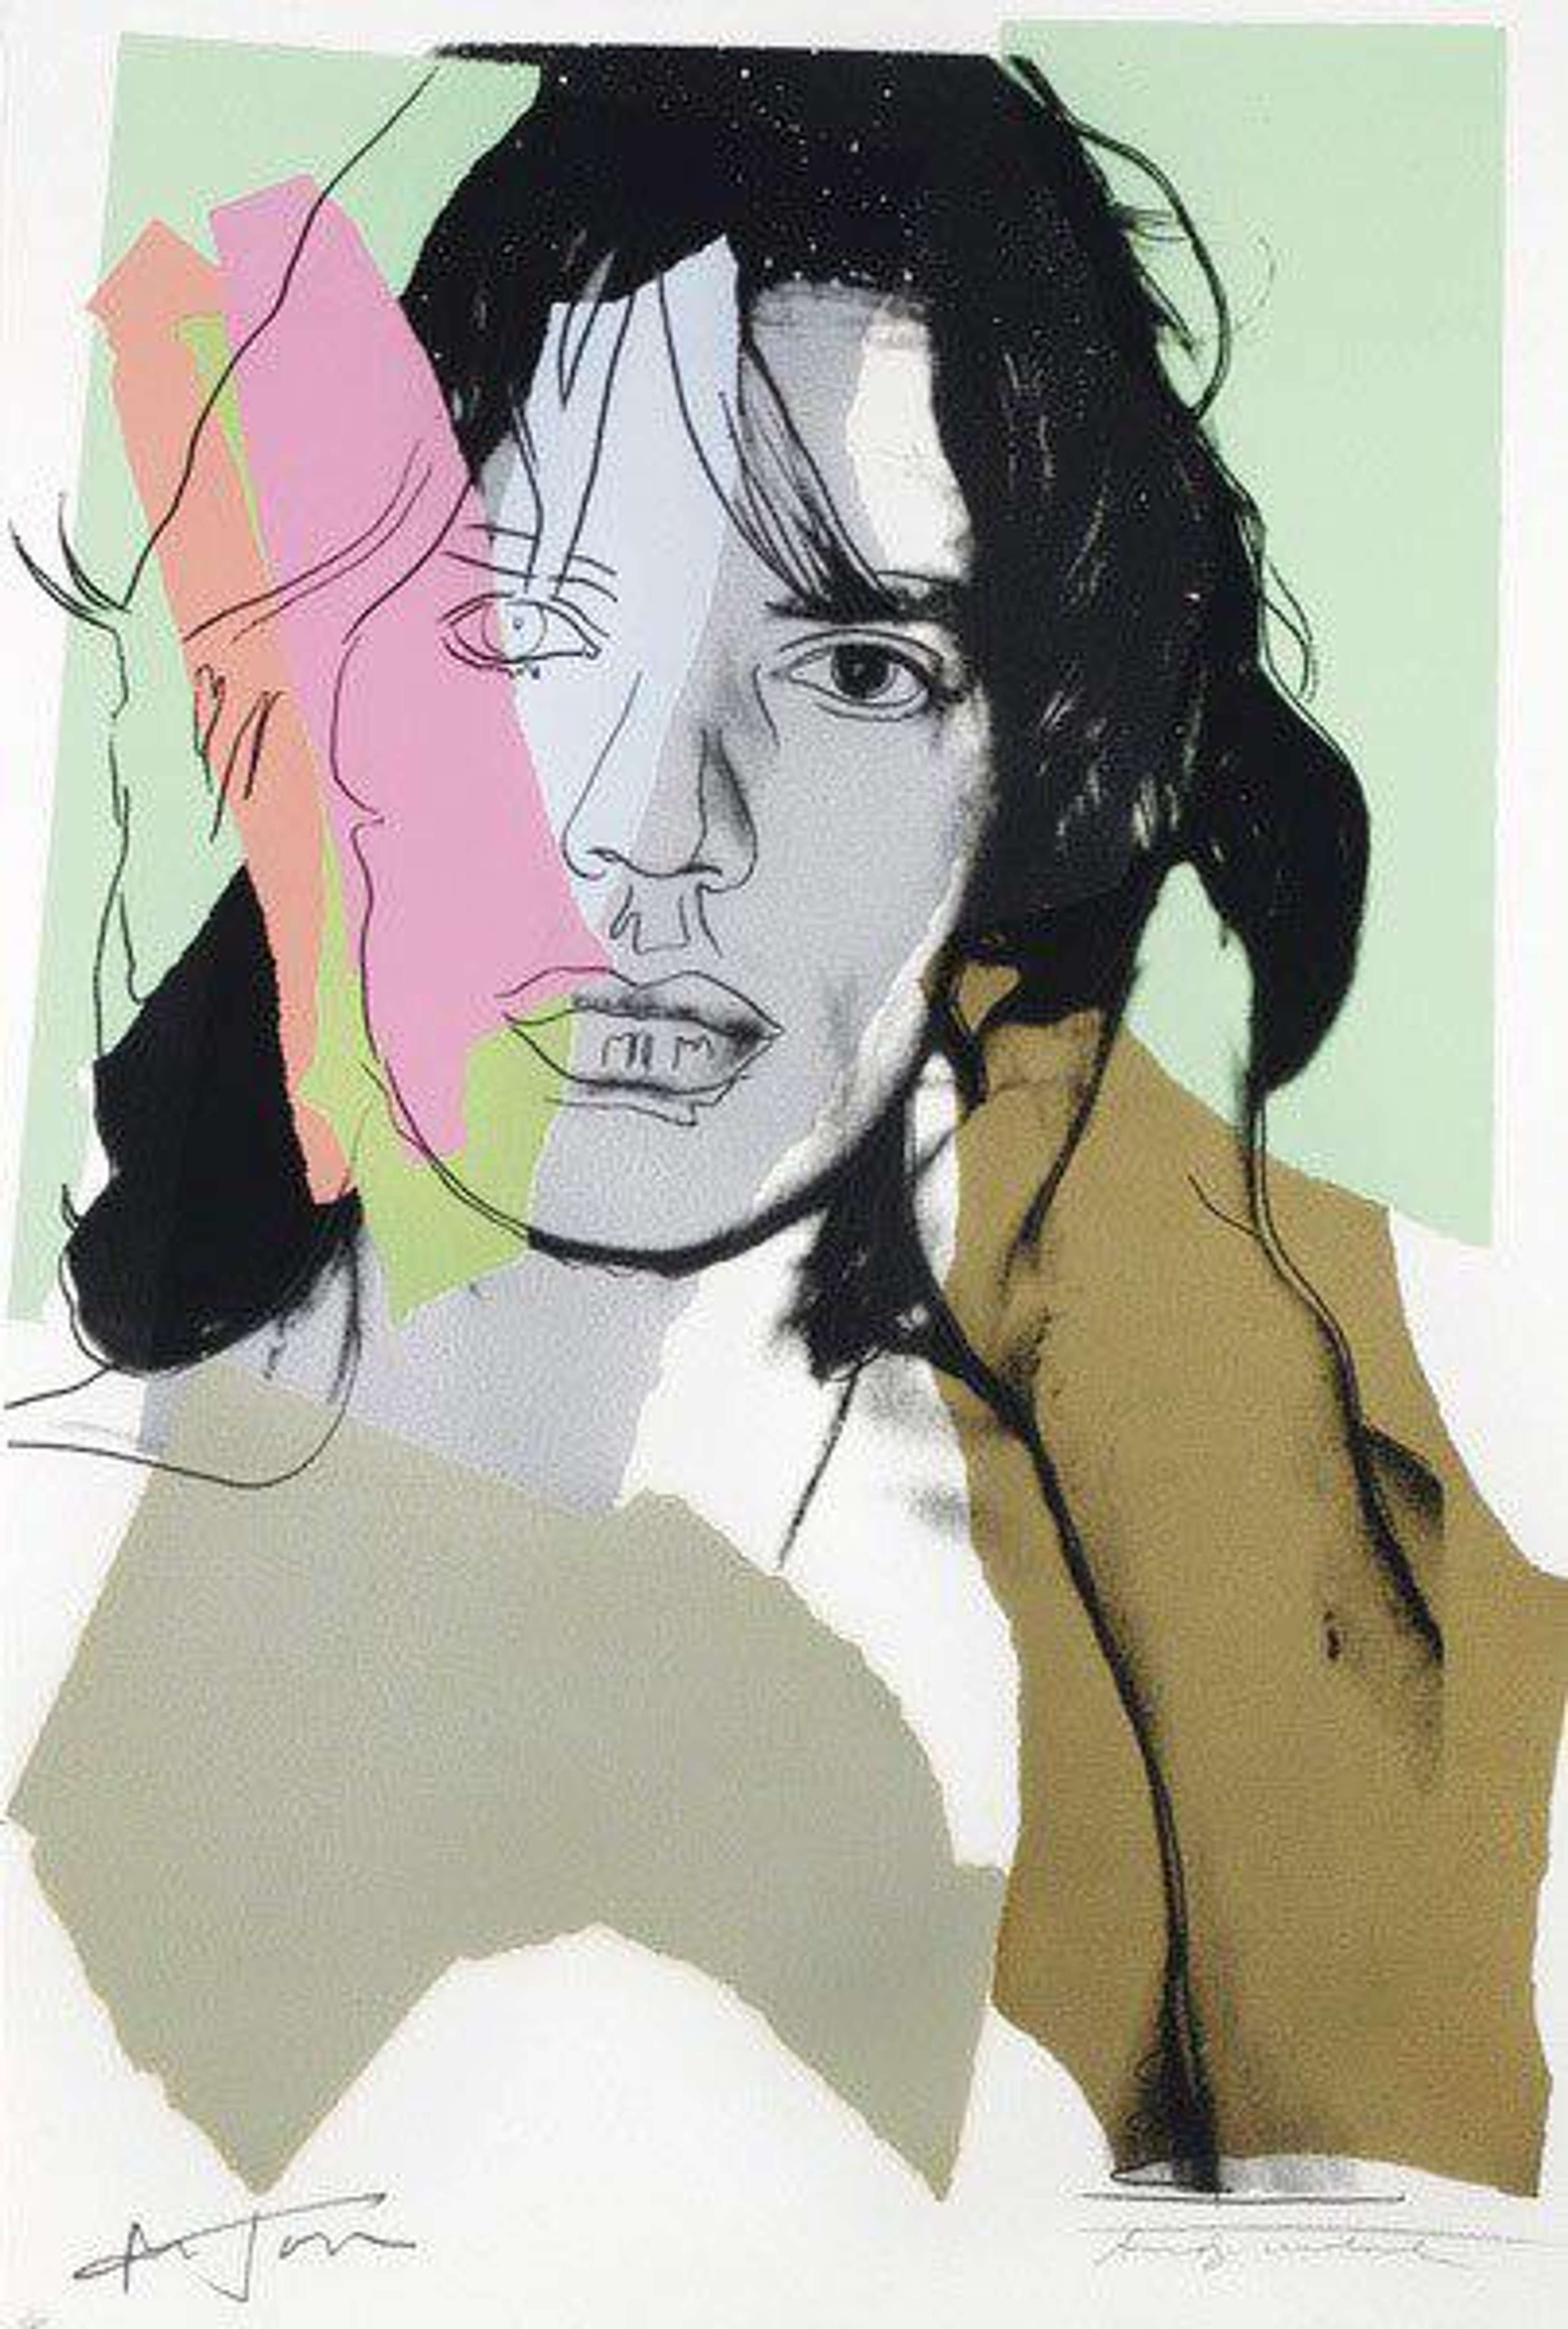 A screenprint by Andy Warhol depicting Rolling Stones frontman Mick Jagger in black ink over collaged blocks of green, gold and pink.